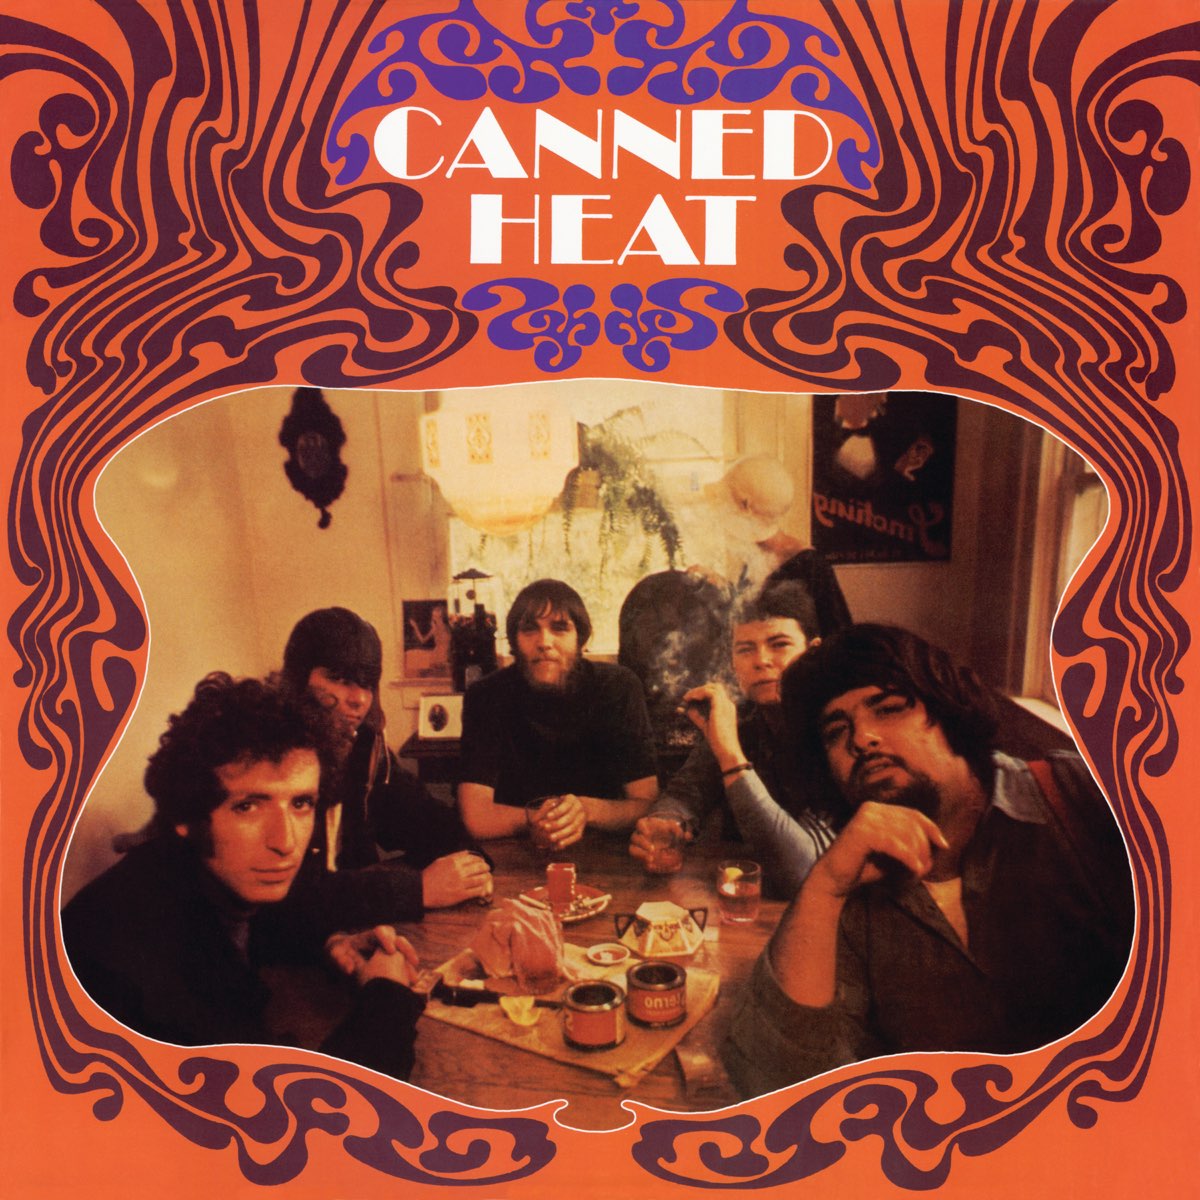 Canned heat steam фото 27